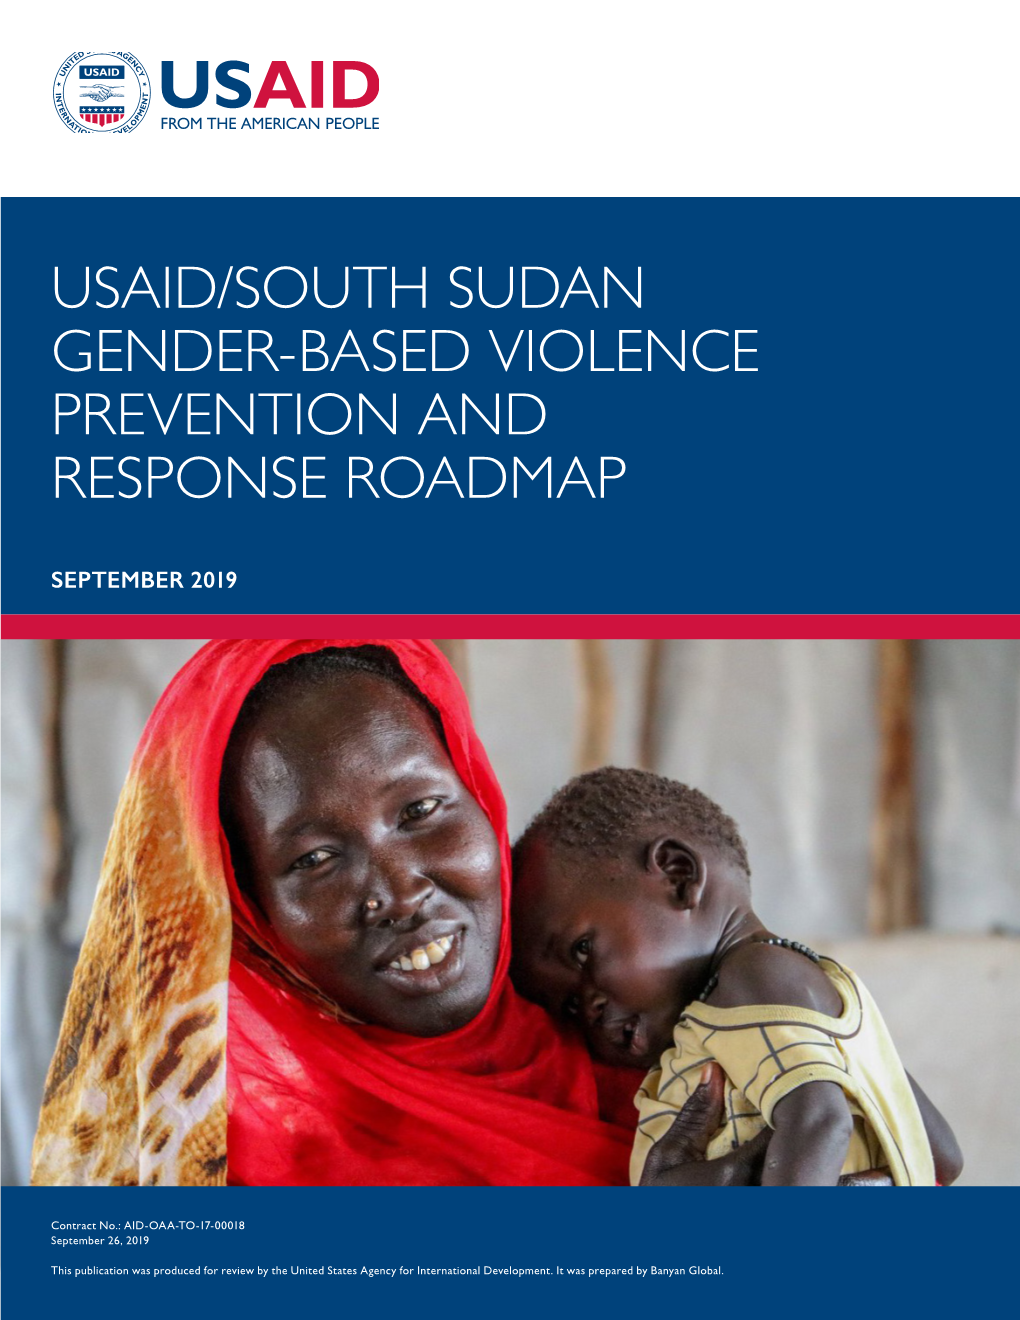 Usaid/South Sudan Gender-Based Violence Prevention and Response Roadmap